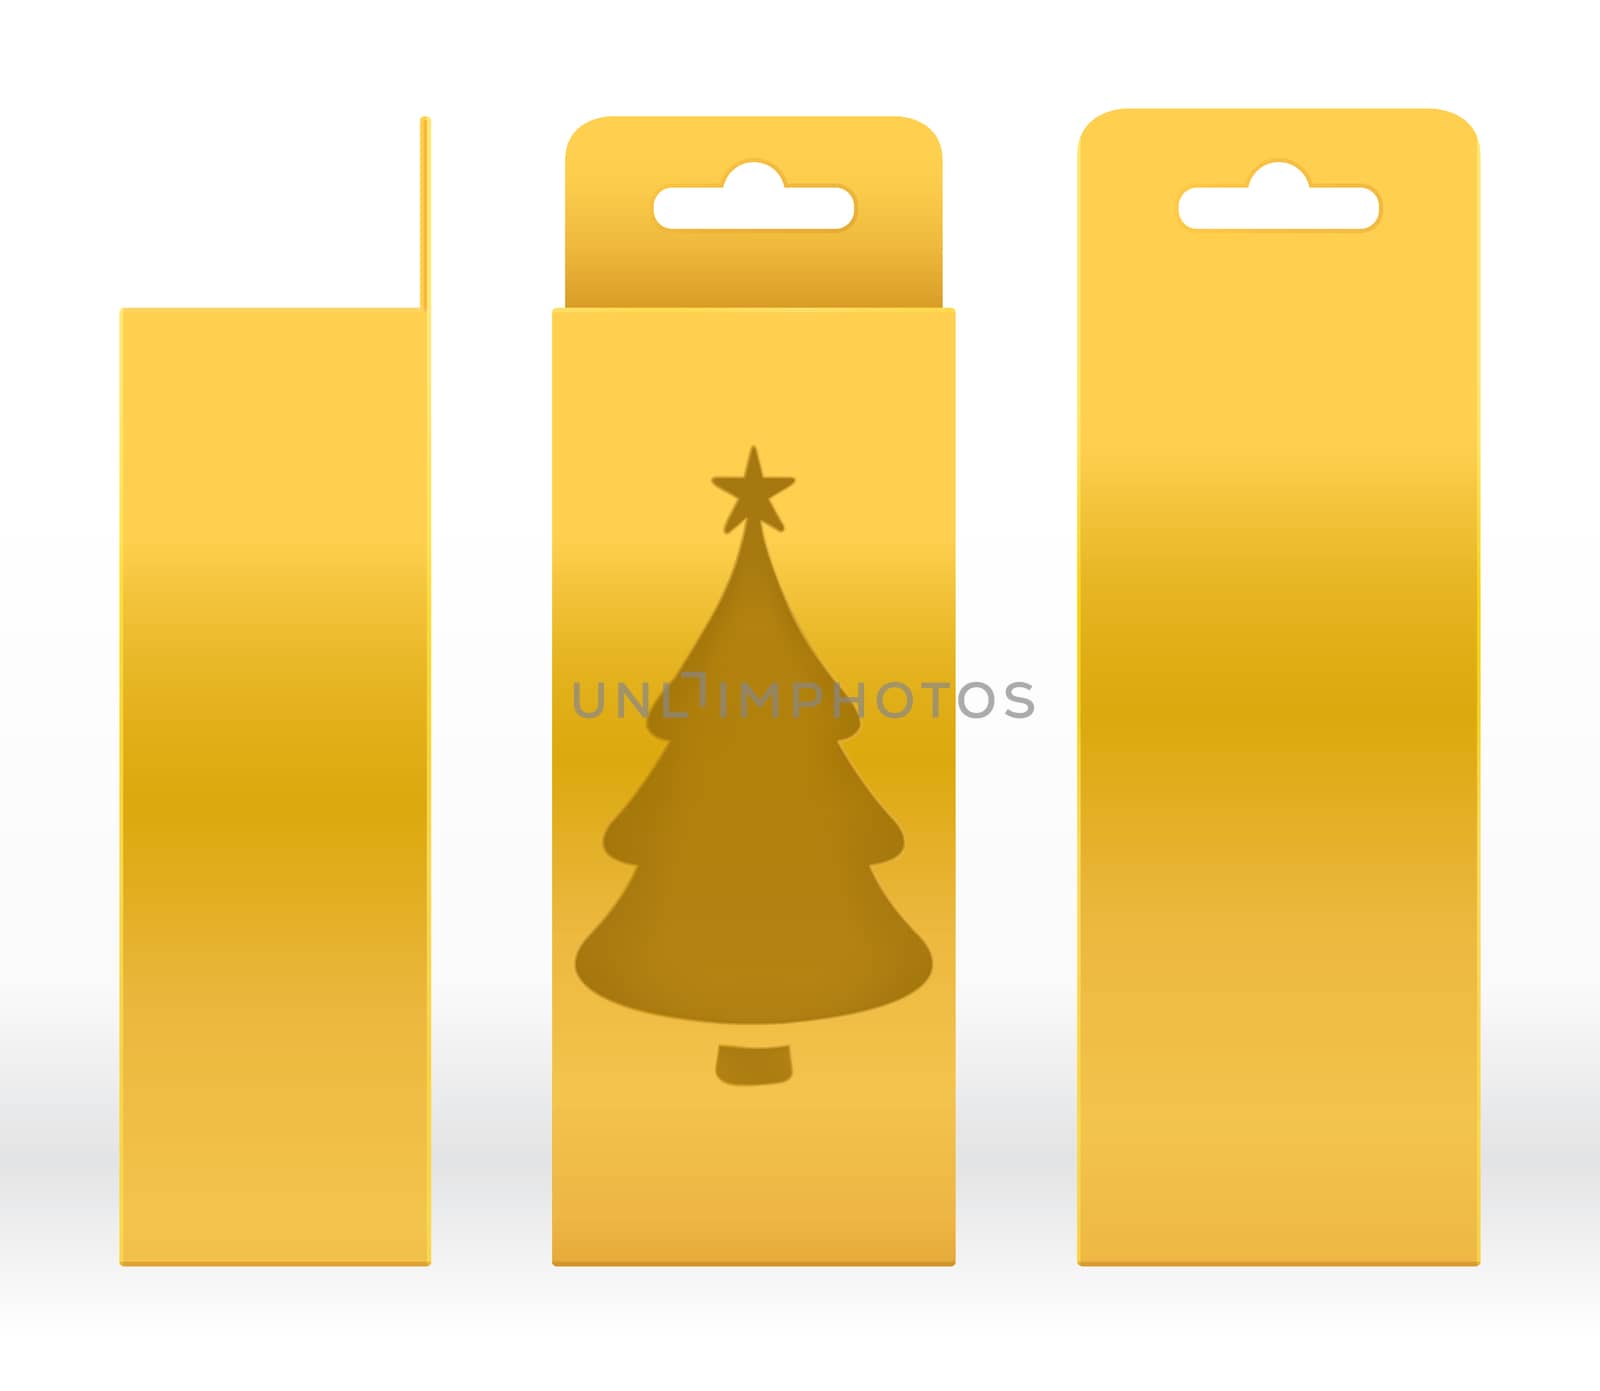 Hanging Box Gold window Christmas tree shape cut out Packaging Template blank. Luxury Empty Box Golden Template for design product package gift box, Gold Box packaging paper kraft cardboard package